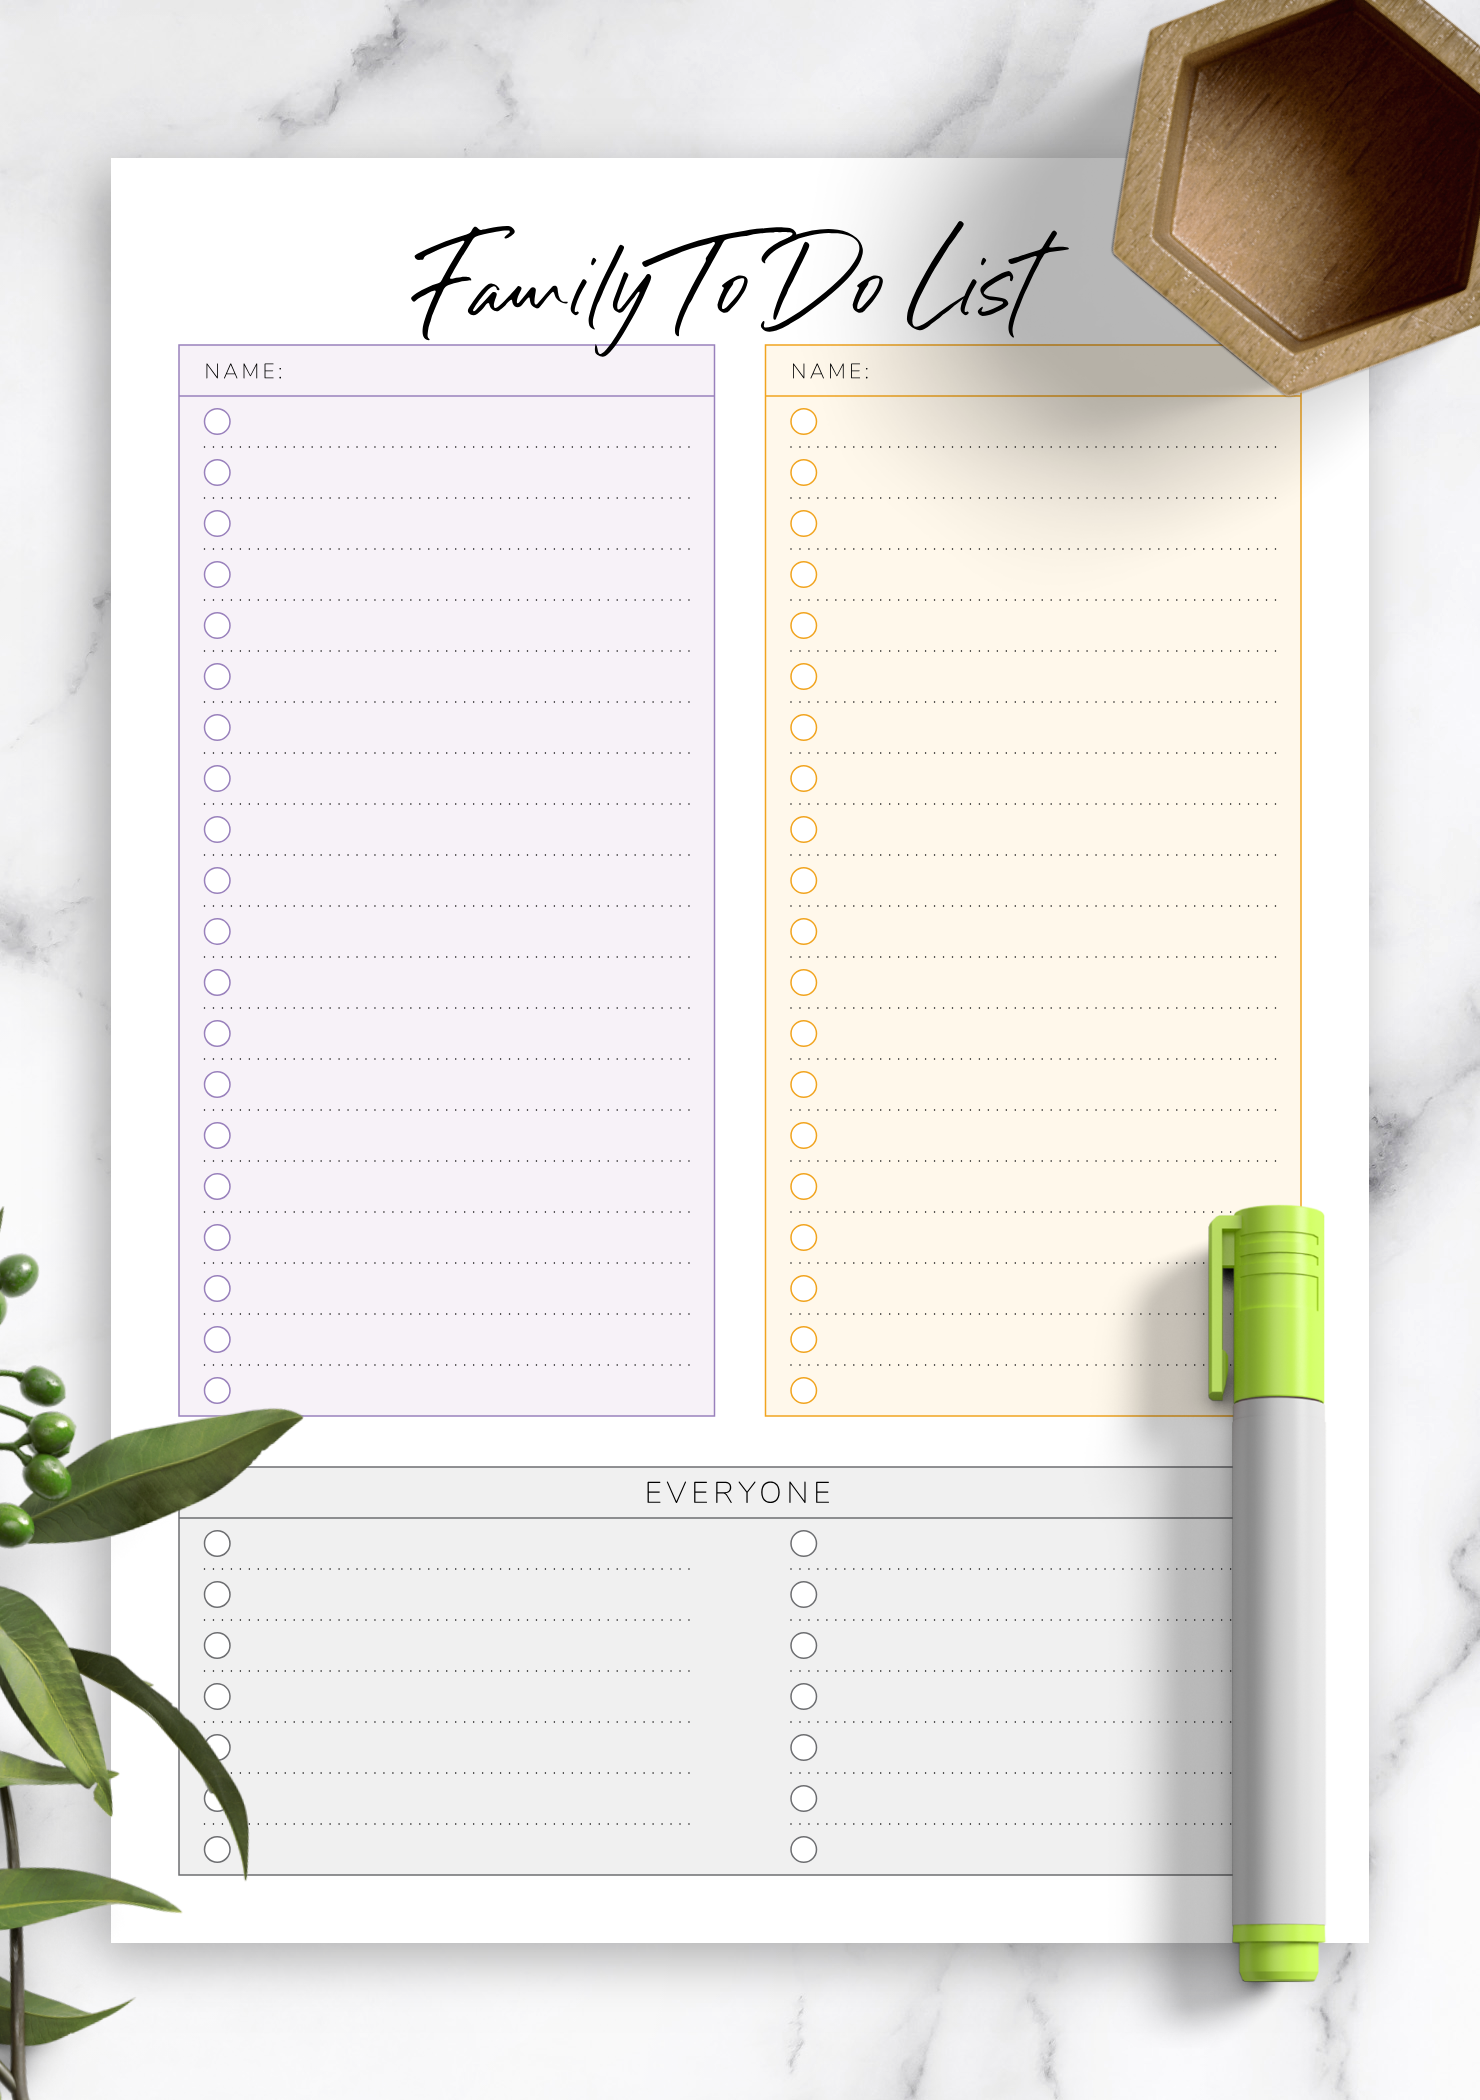 Download Printable Family To Do List for Two Persons PDF